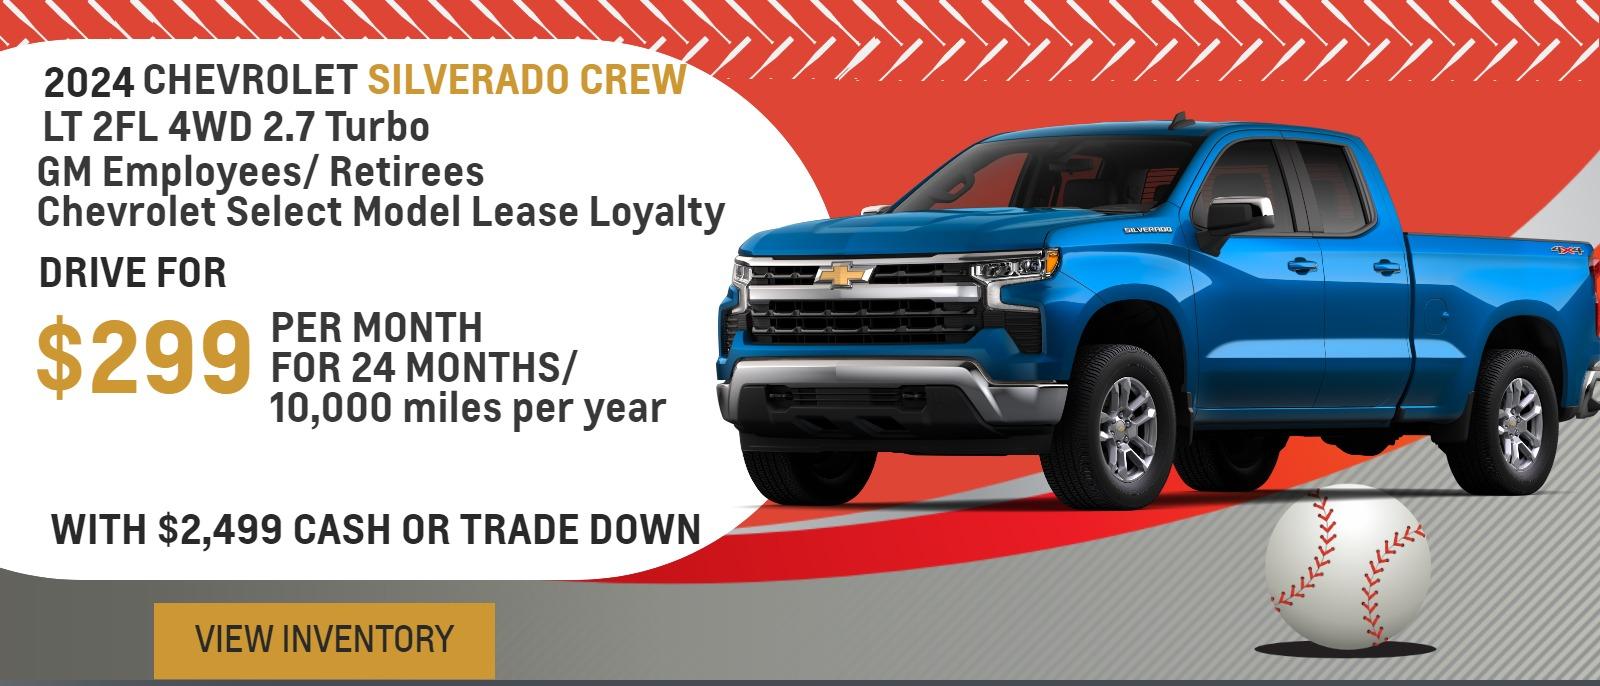 GM Employees/ Retirees
Chevrolet Select Model Lease Loyalty

Drive for $299 per month
24 Months / 10,000 miles per year
With $2,499 cash or trade down